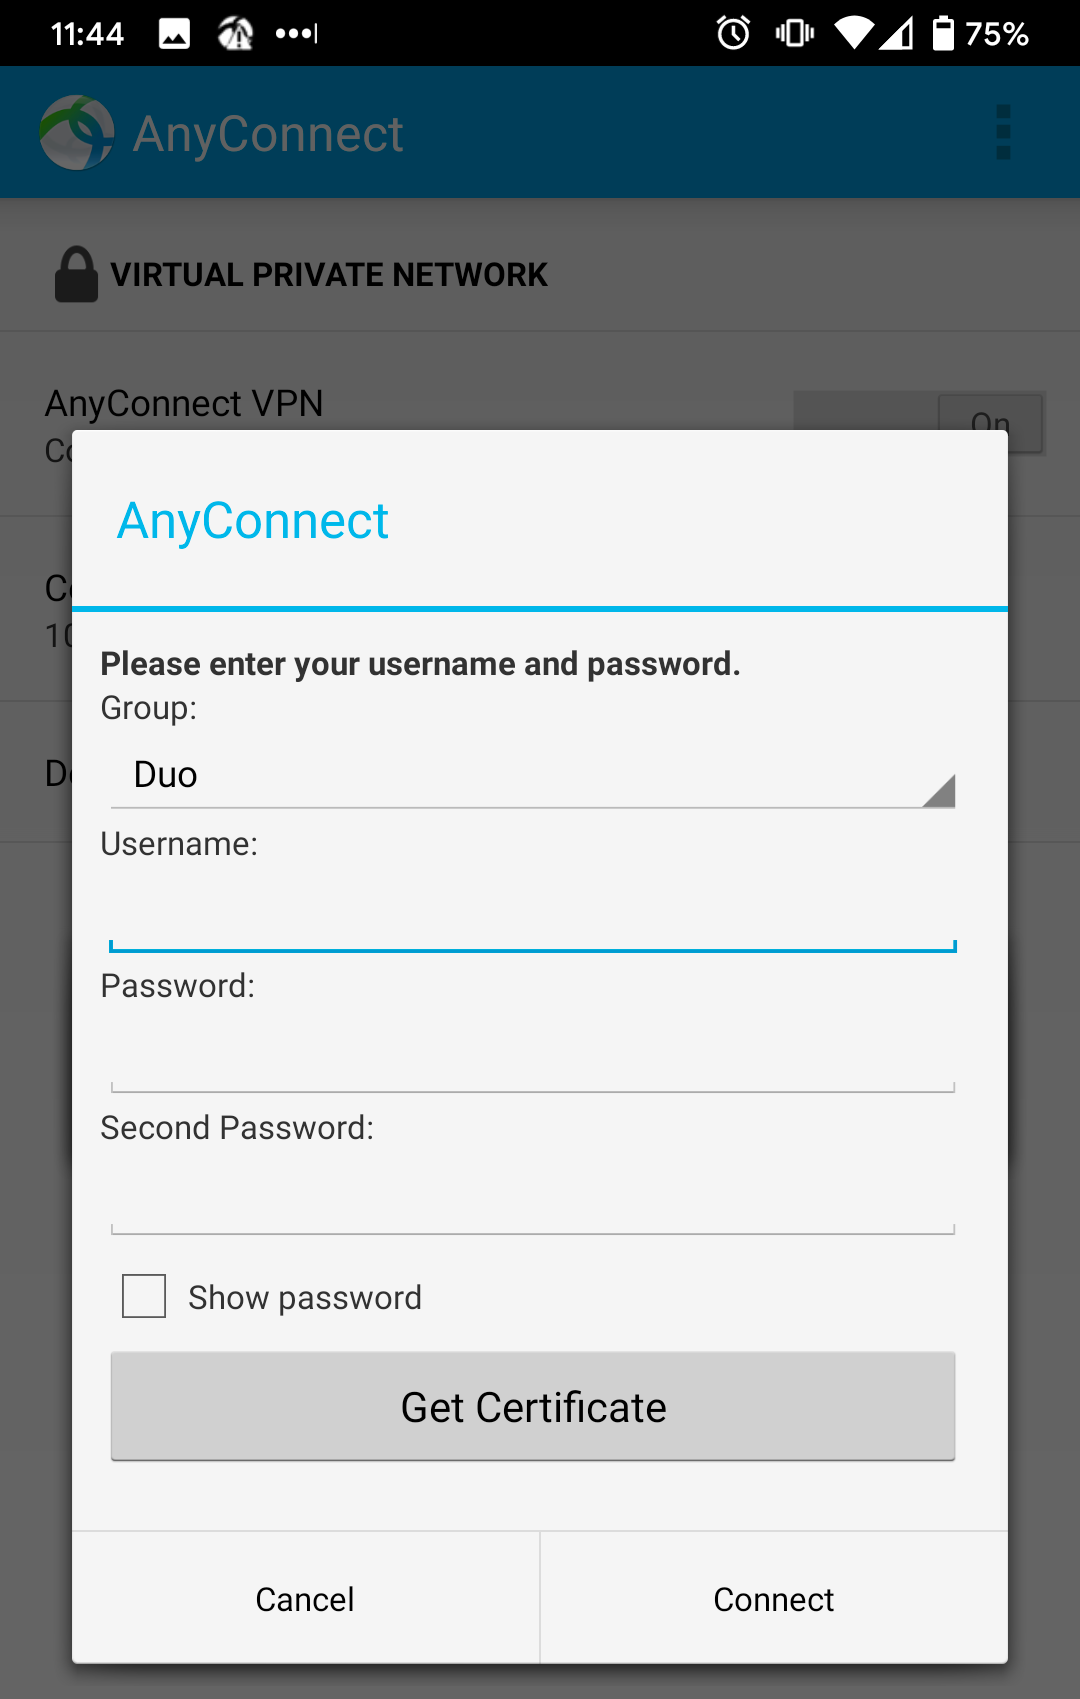 AnyConnect Mobile Client with Second Password